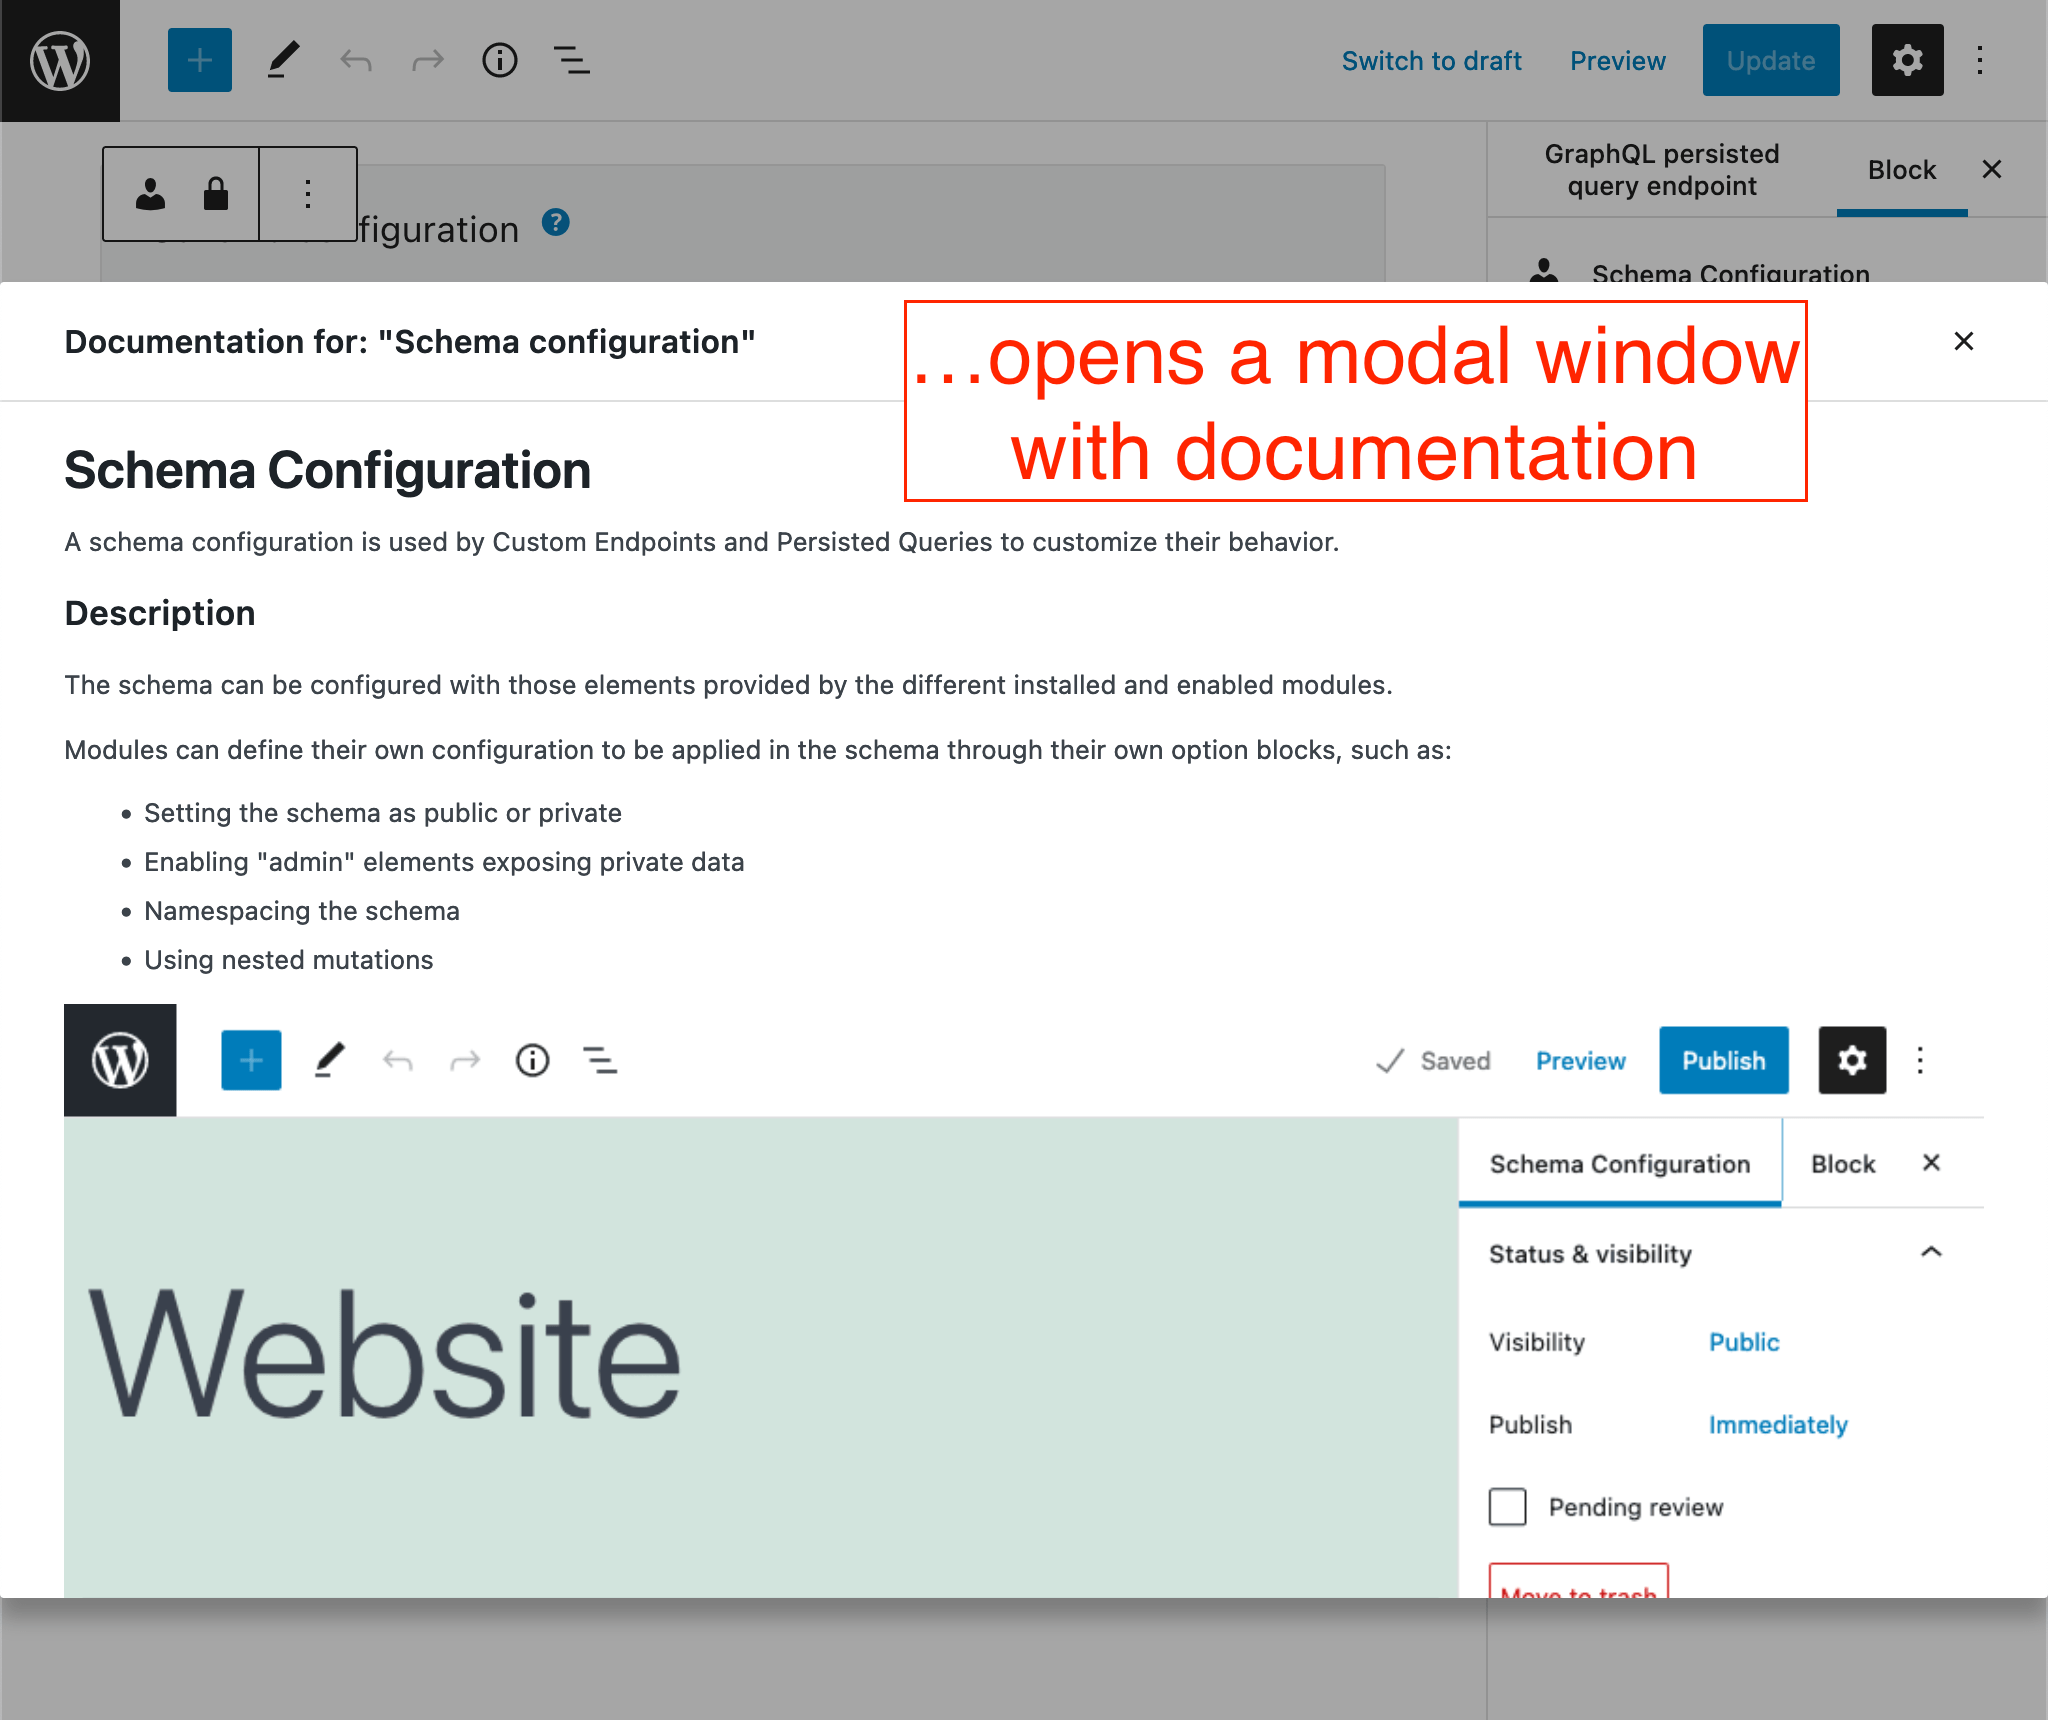 ...opens a modal window with documentation